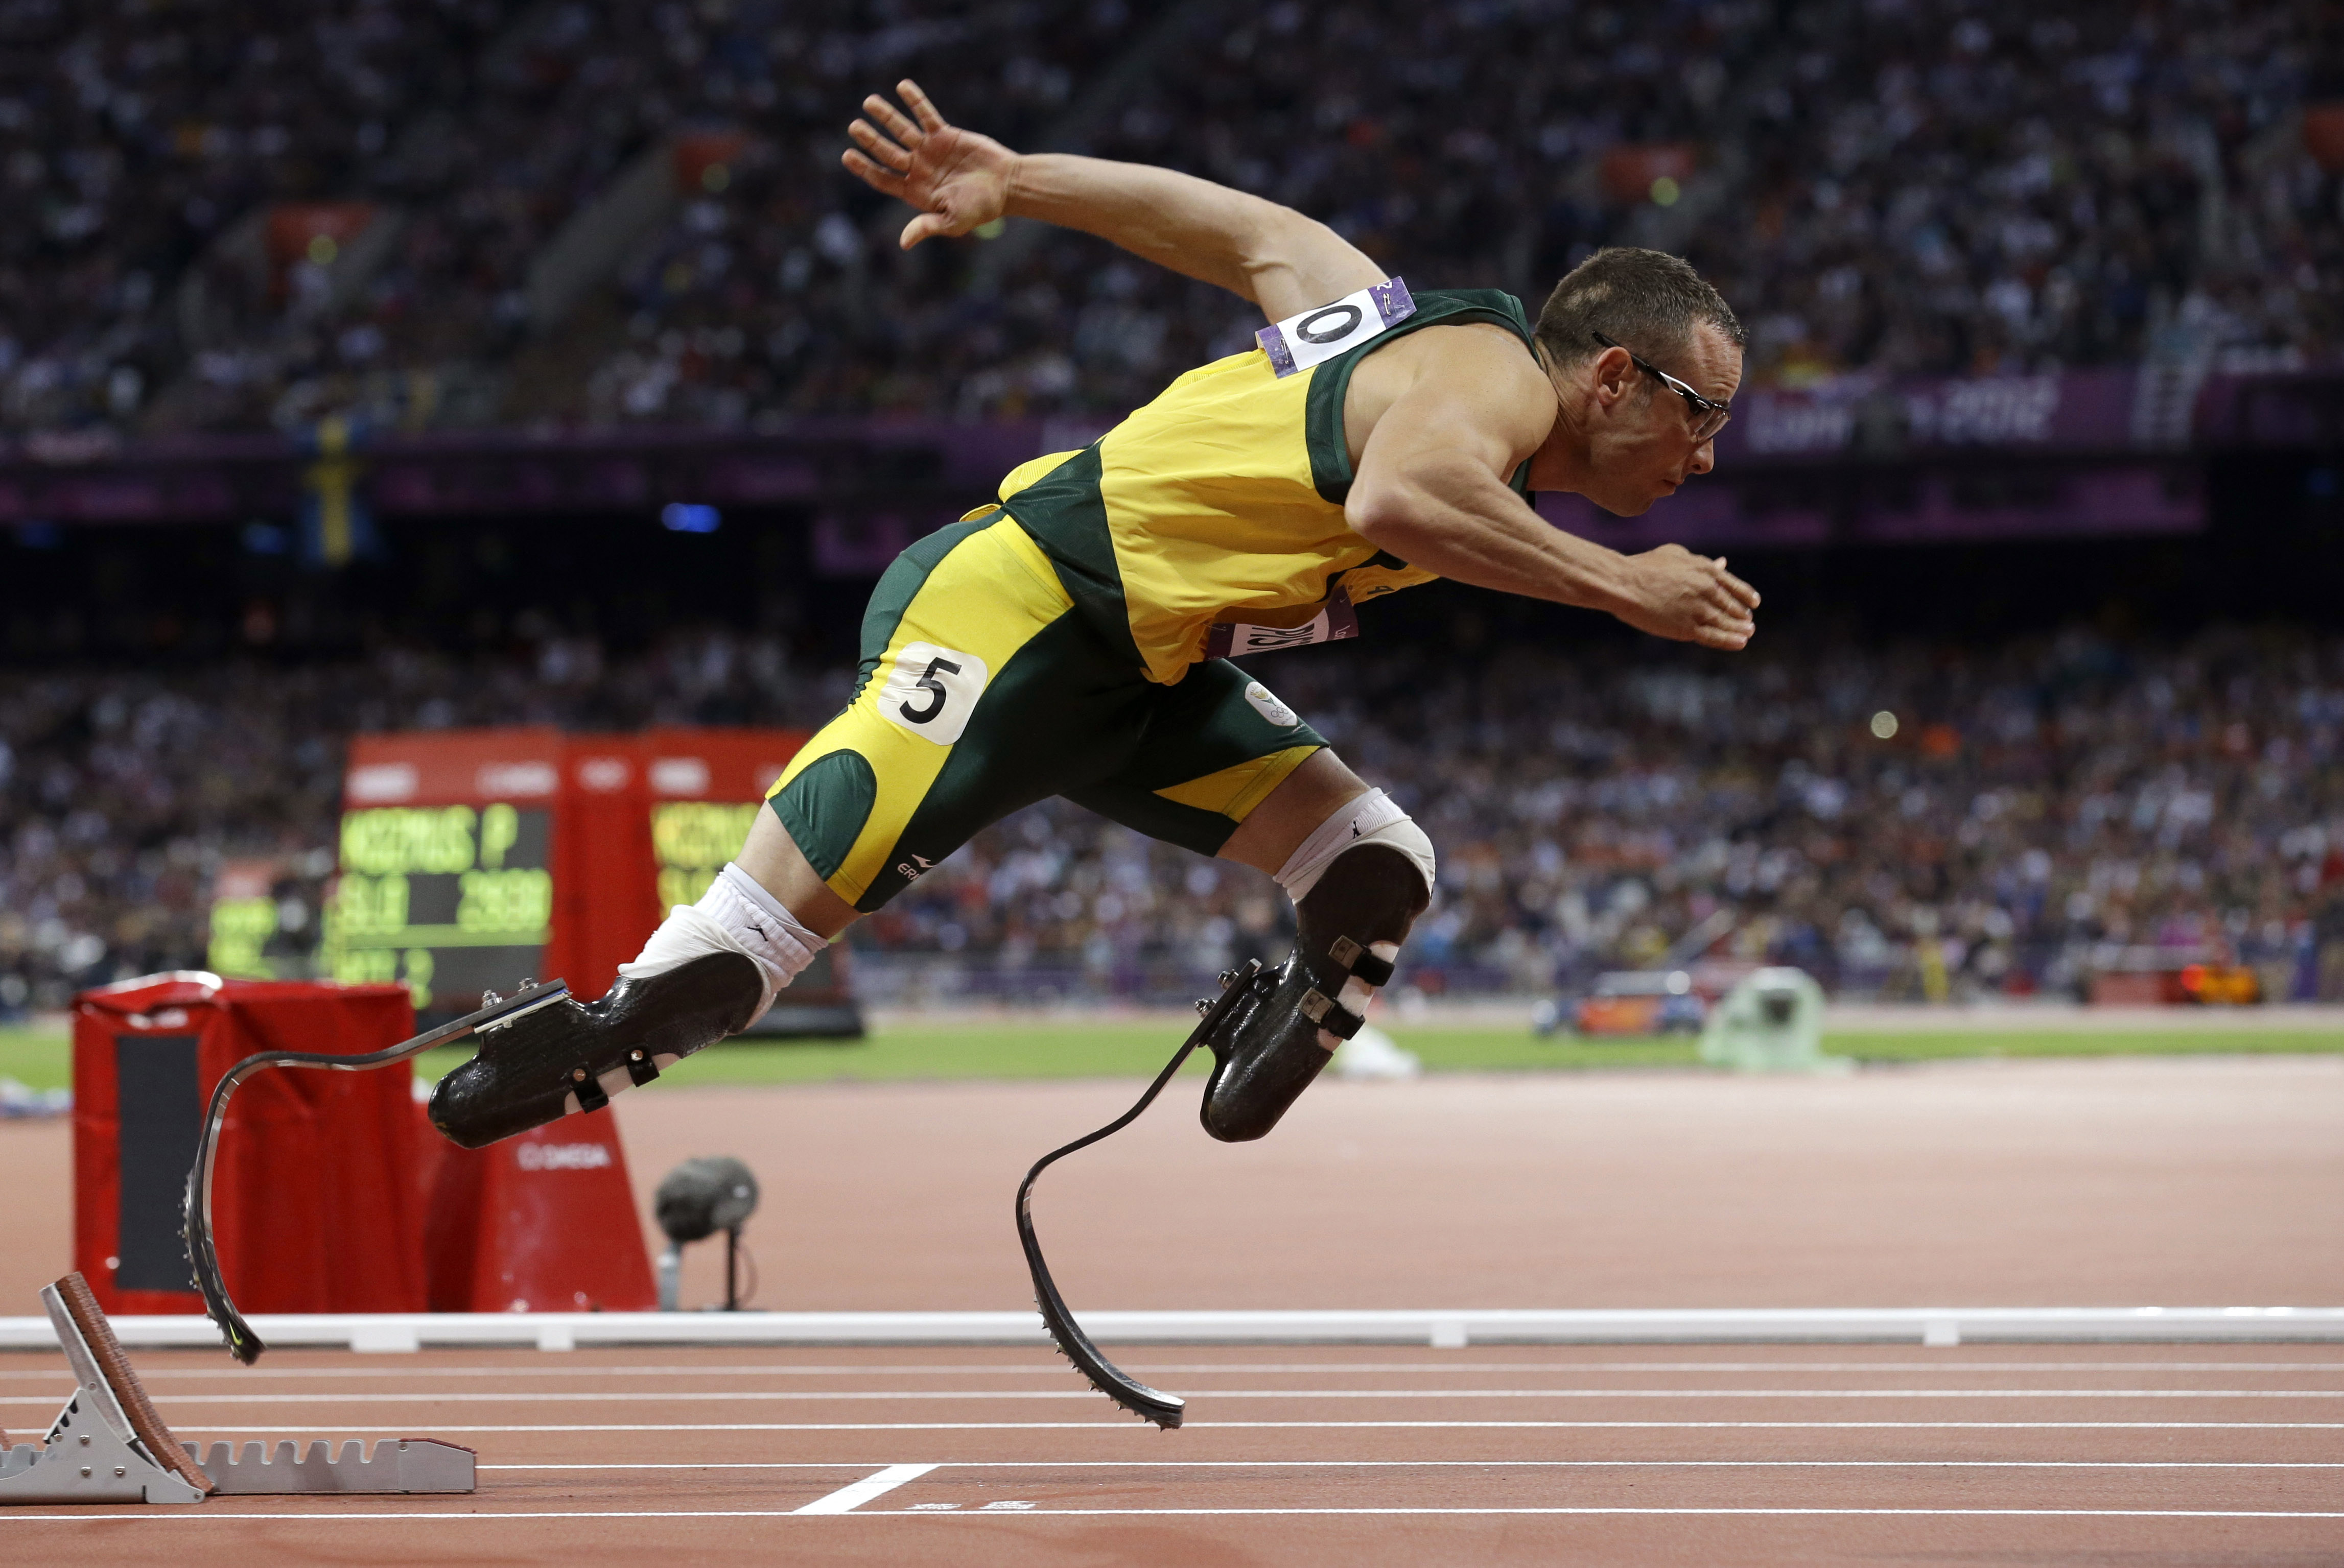 "Blade Runner" Oscar Pistorius was convicted of culpable homicide over the killing of his girlfriend. Photo: AP